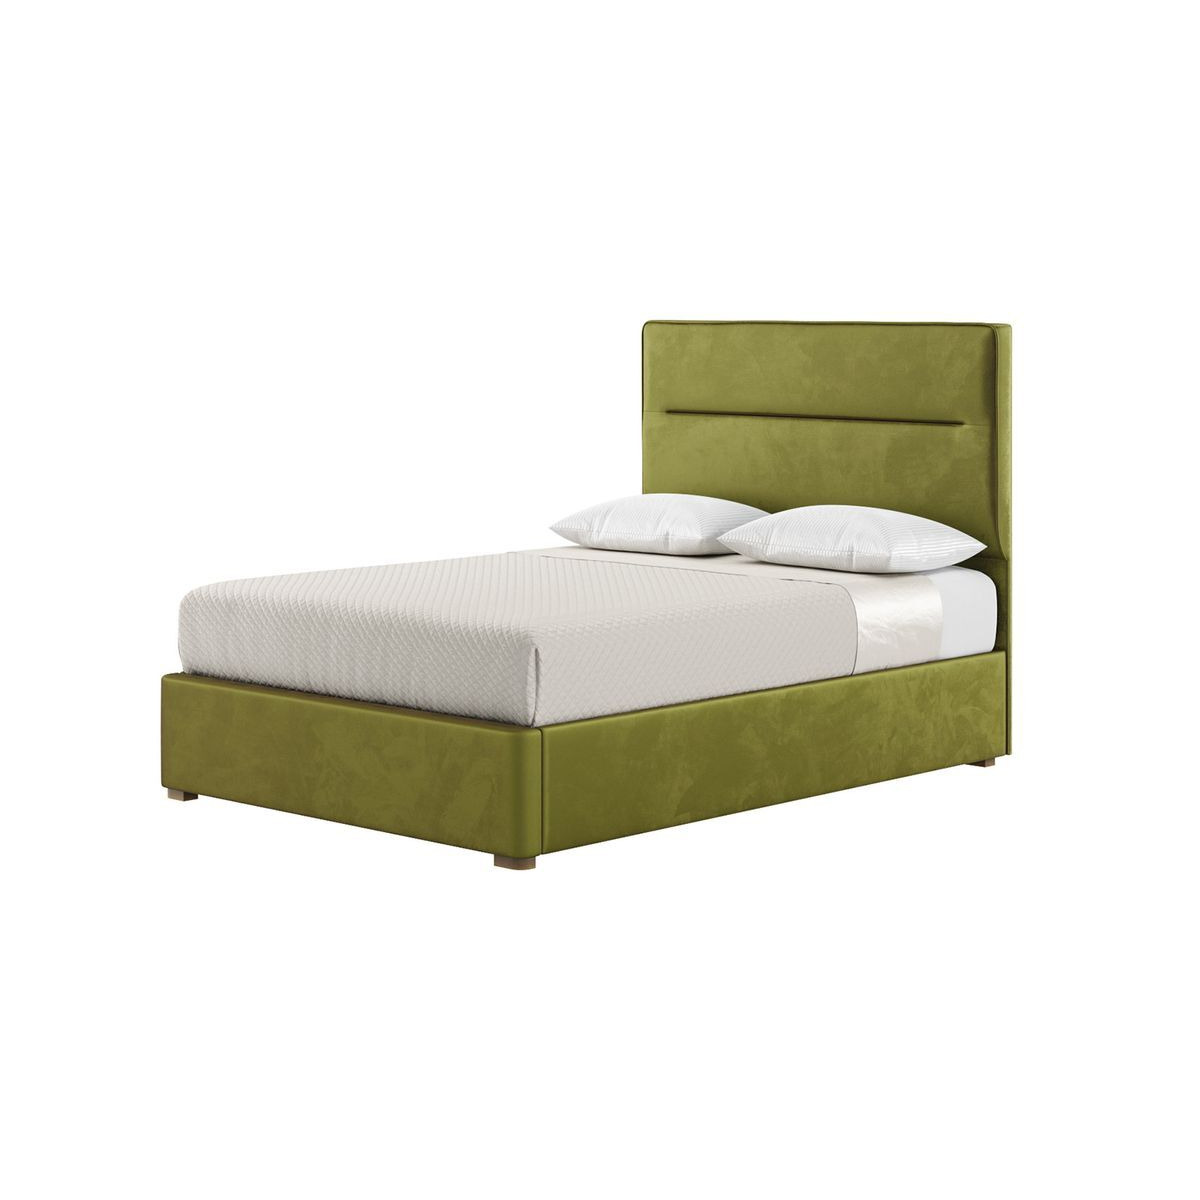 Lewis 4ft6 Double Bed Frame Modern Horizontal Stitch Headboard, olive green, Leg colour: wax black - image 1